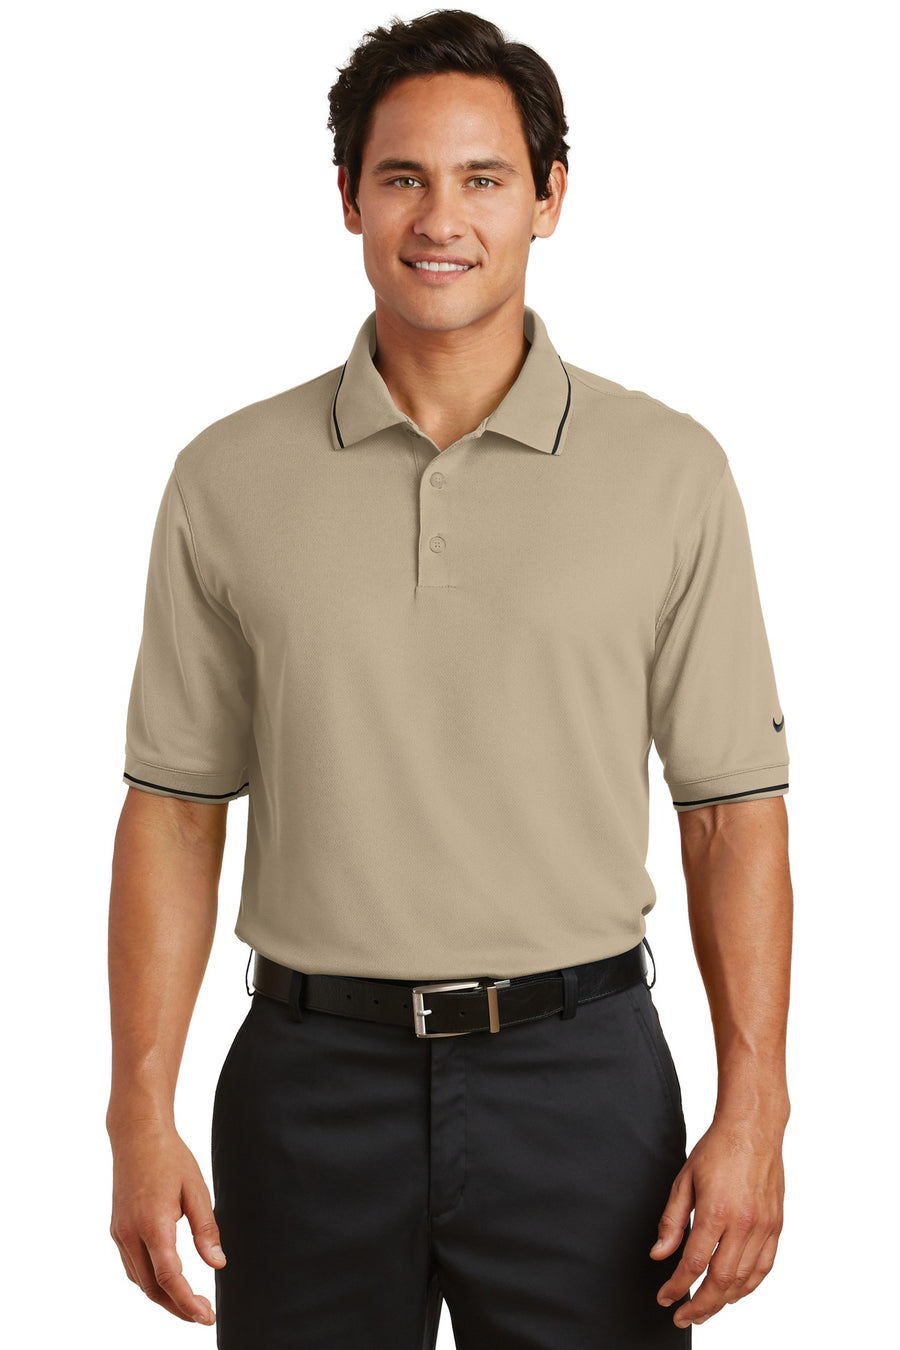 DISCONTINUED Nike Dri-FIT Classic Tipped Polo.